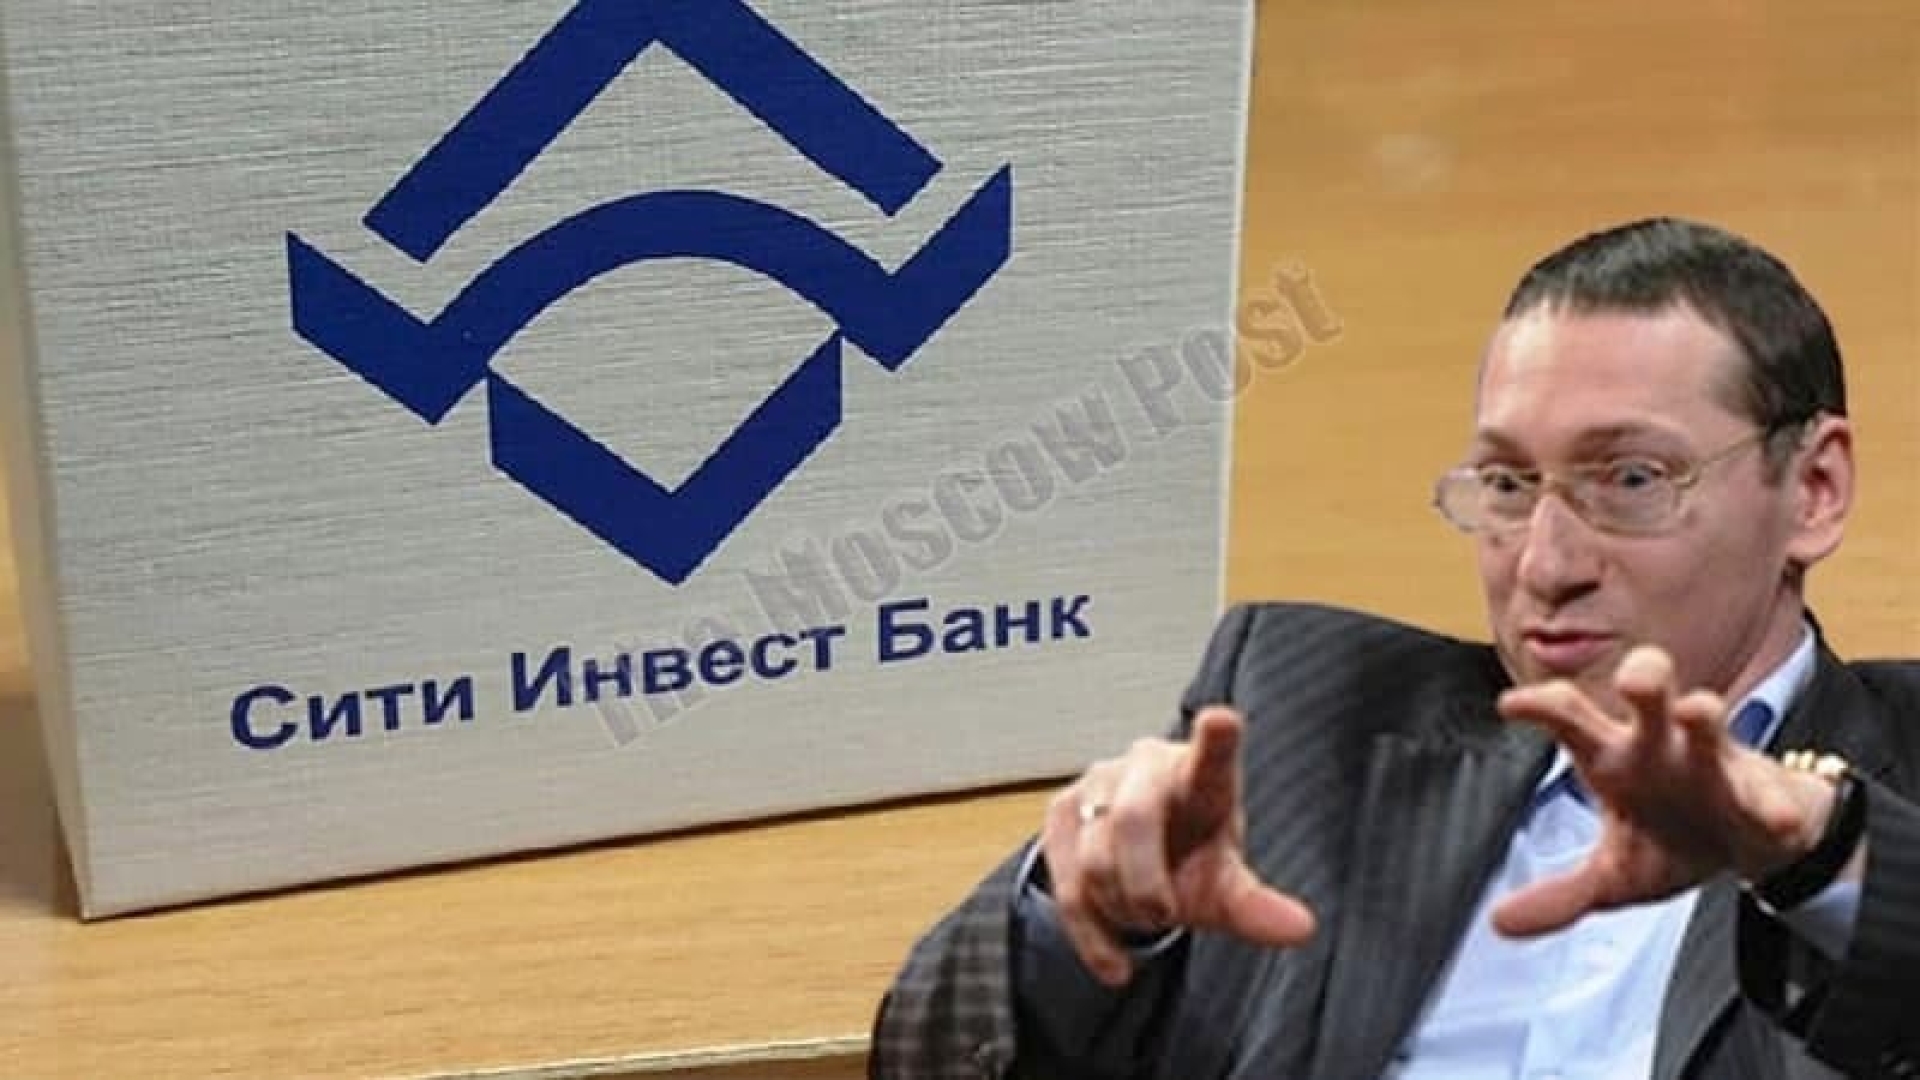 "City Invest Bank" for "their" and Lysyakova